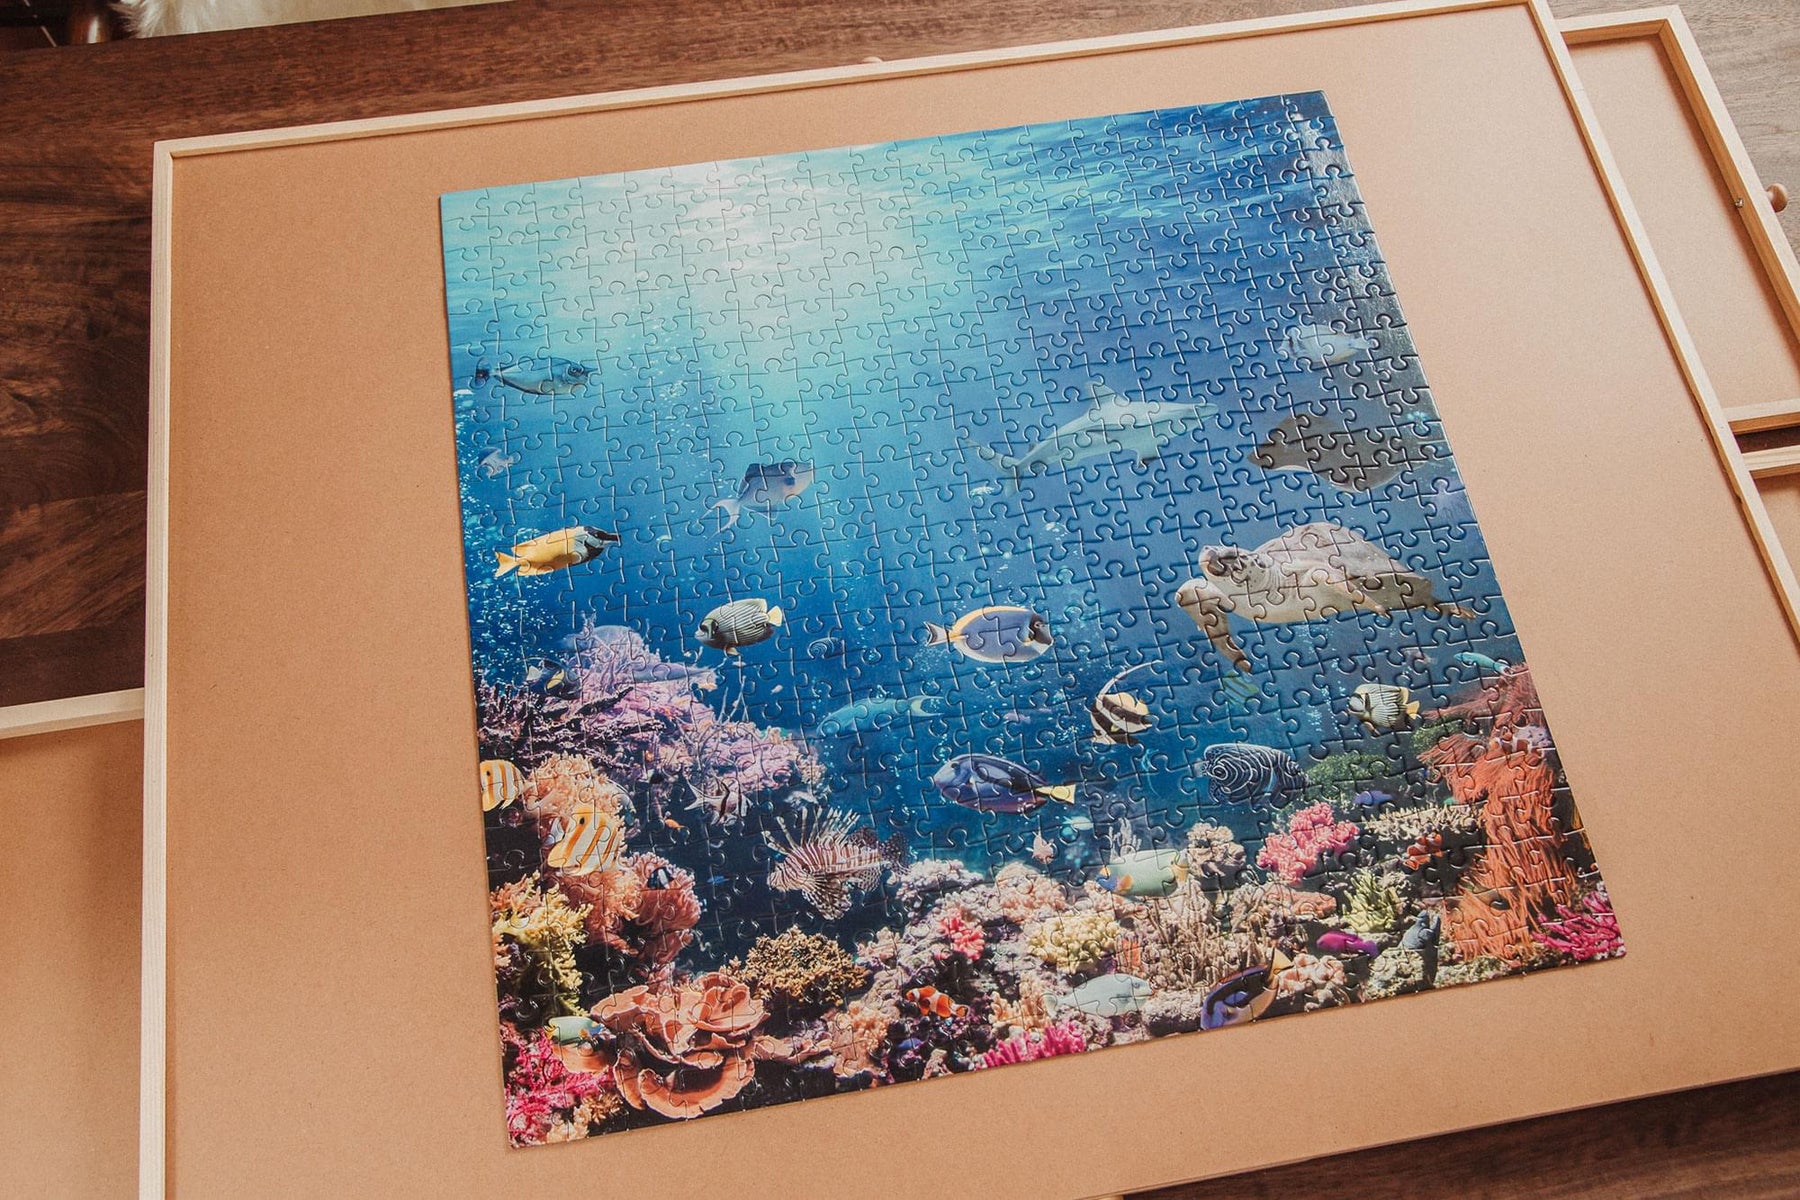 Under the Sea Coral Reef 500 Piece Jigsaw Puzzle